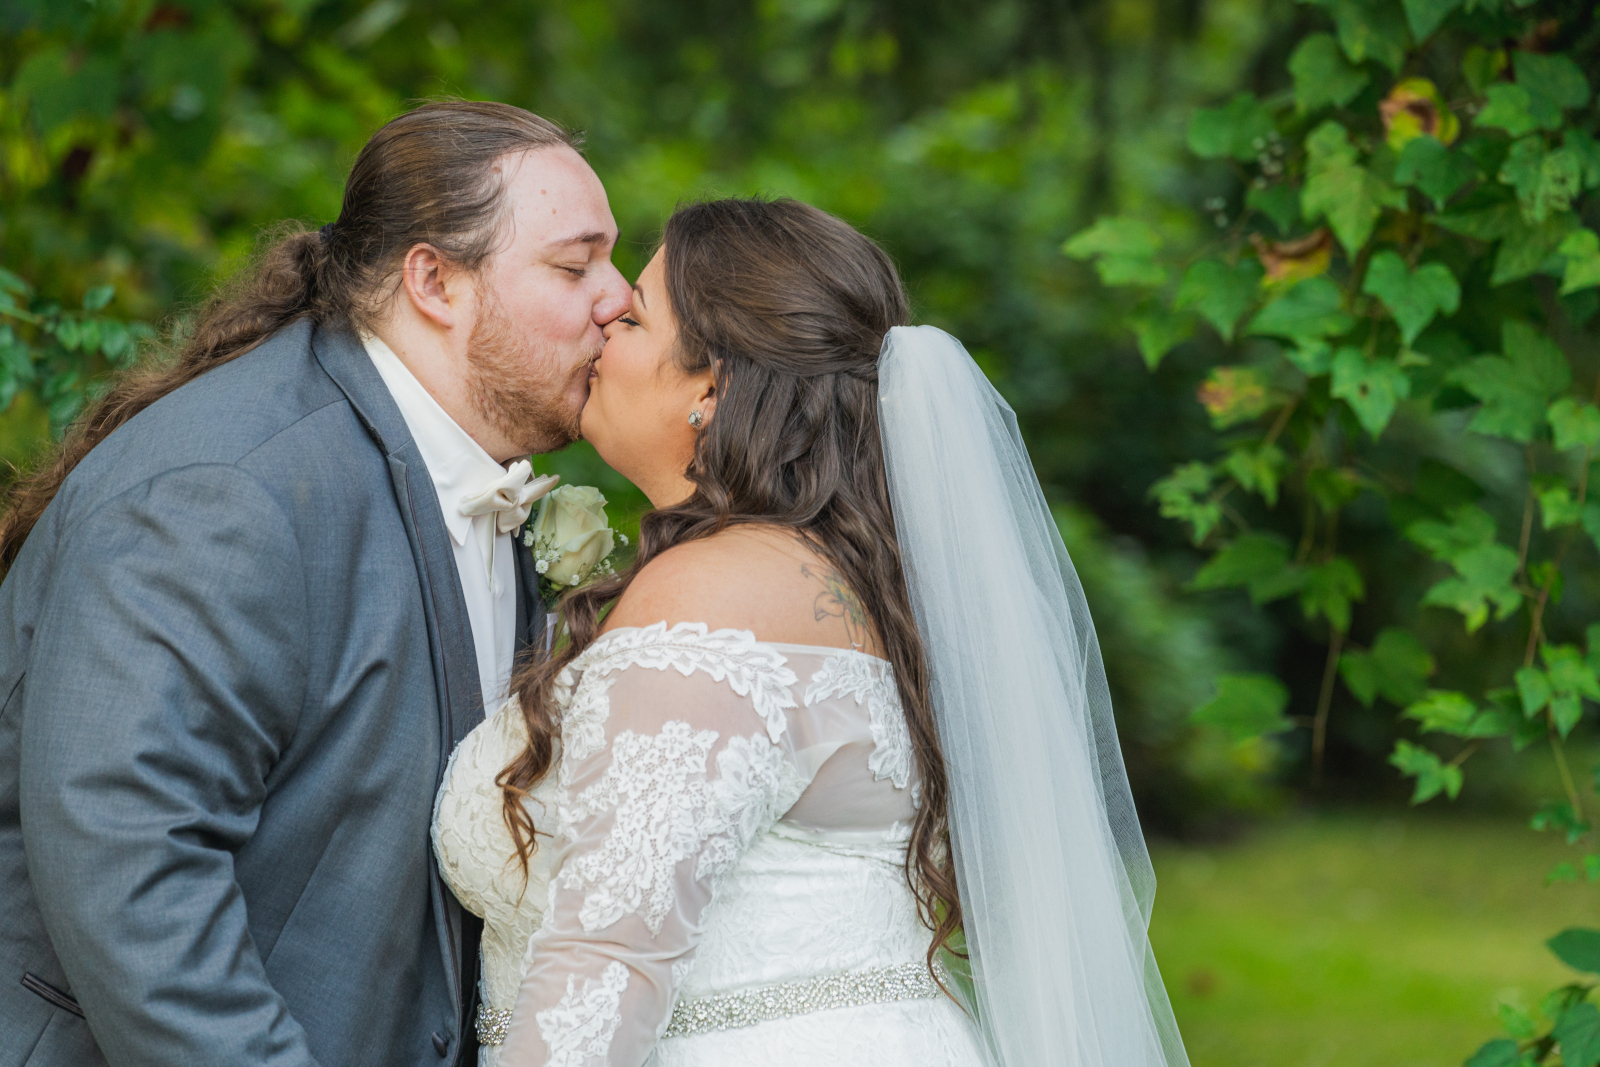 Bride and groom wedding portrait, kiss, green, nature, trees, outdoor September wedding ceremony at Westfall Event Center